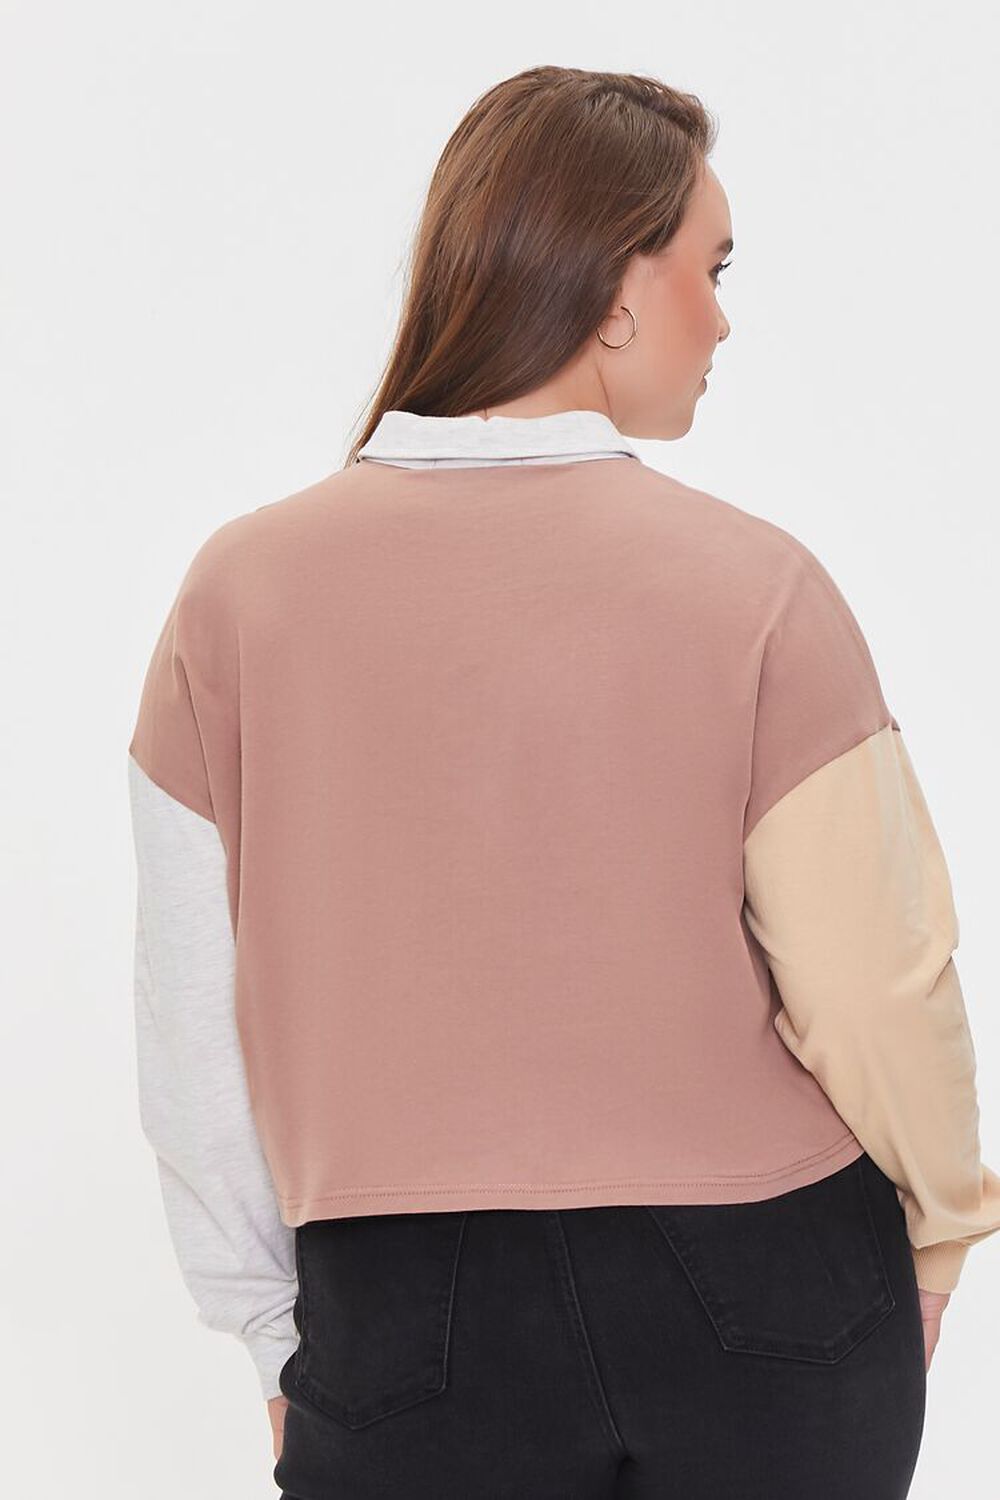 COCOA/MULTI Plus Size Colorblock Rugby Shirt, image 3